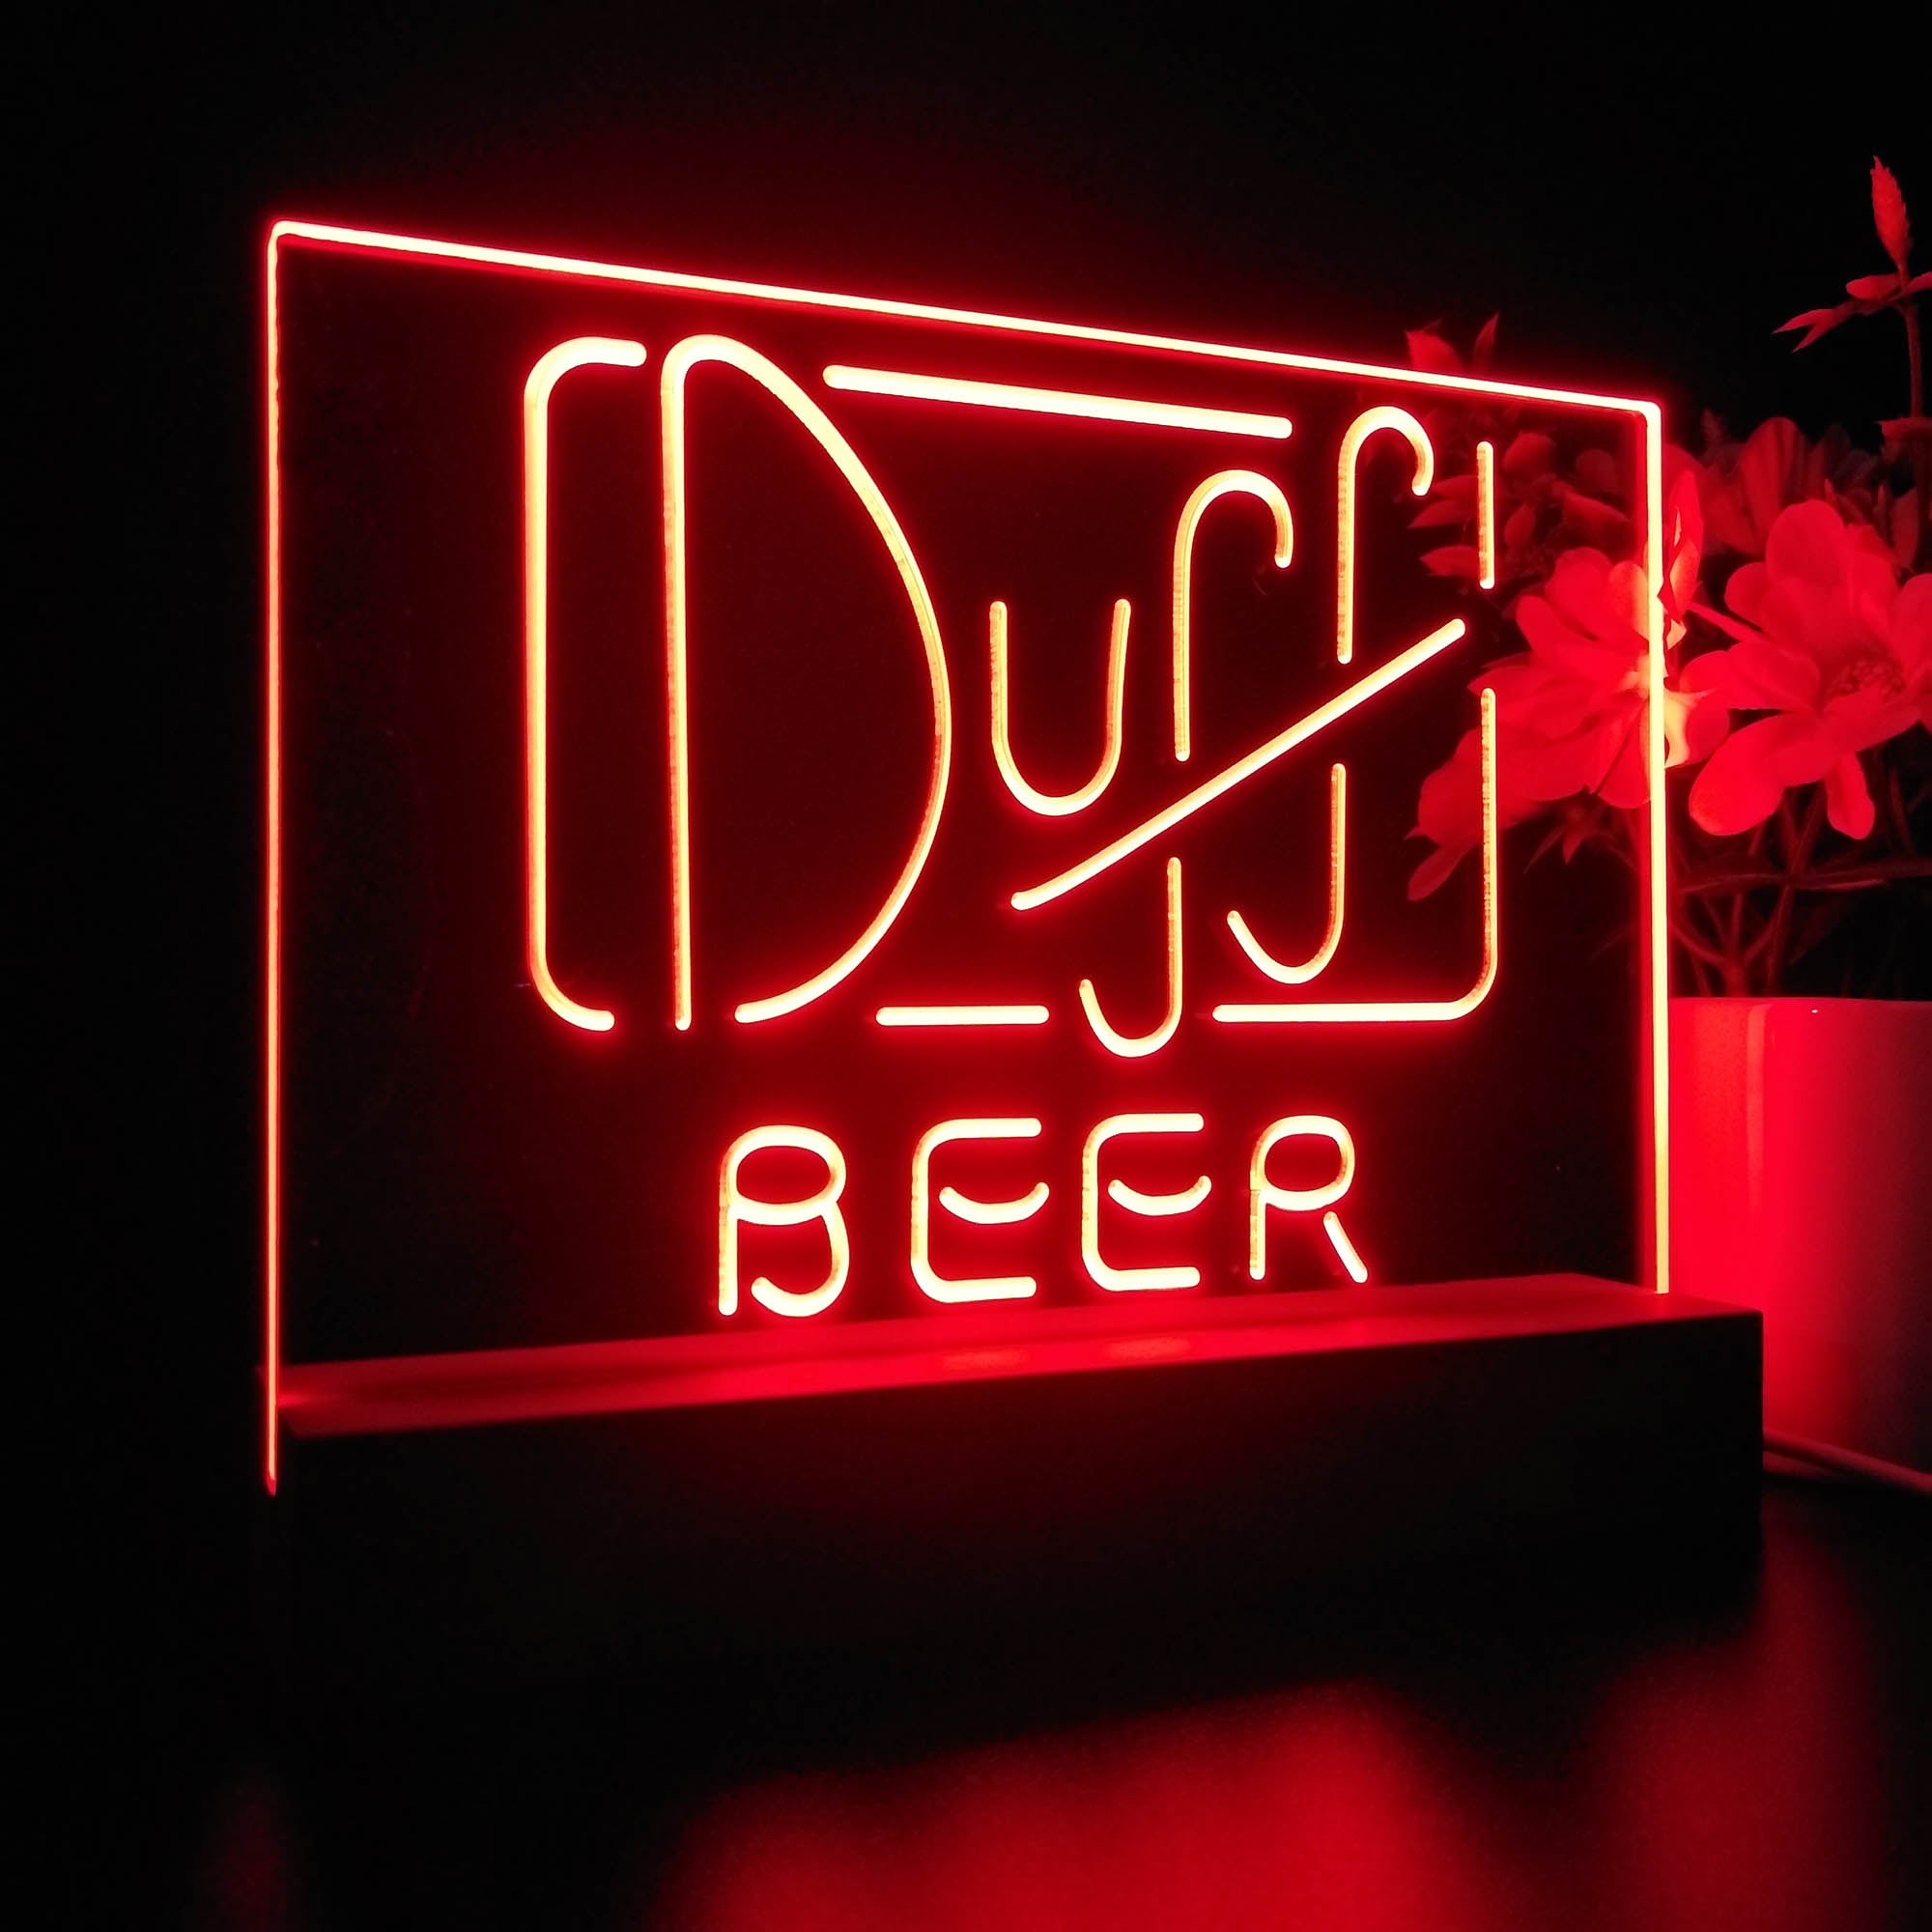 Duff Beer The Simpsons Neon Night Light Sign, Simpsons Gift for Him